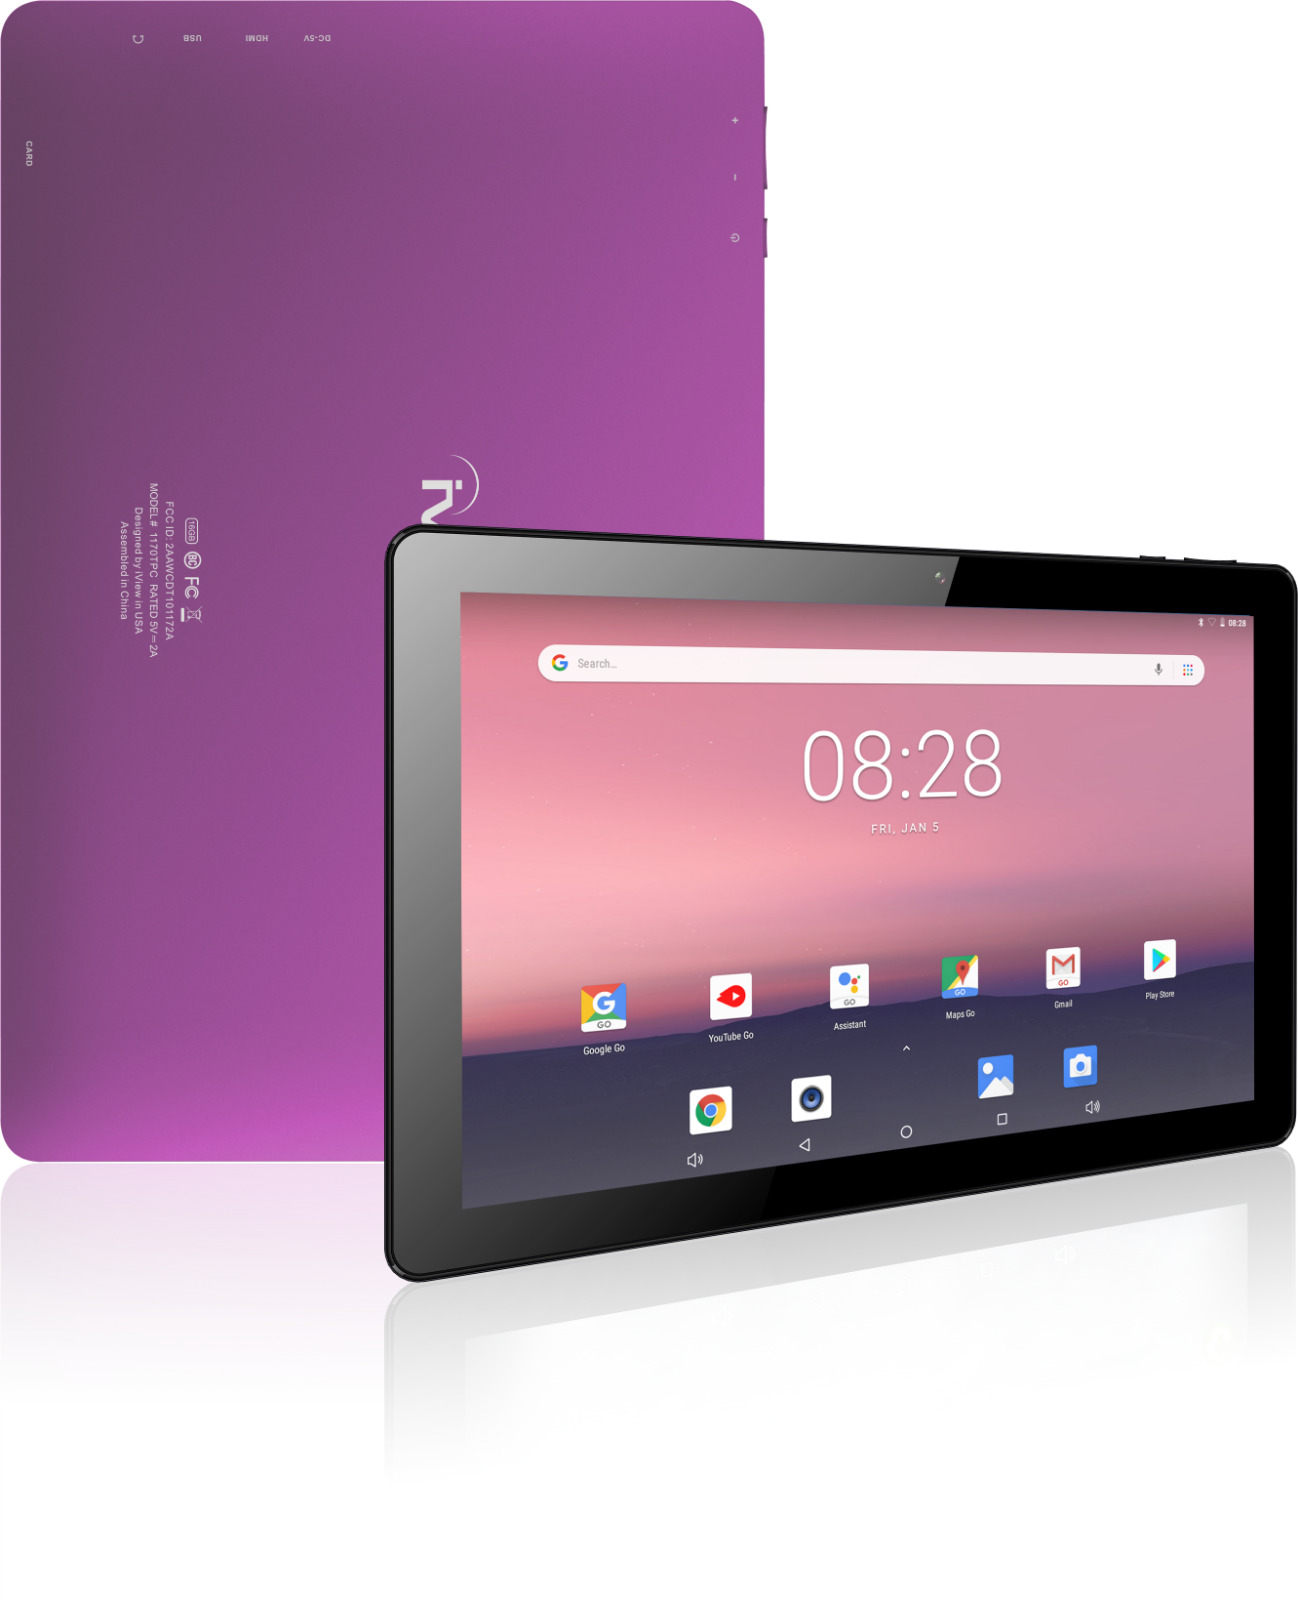 iview 10.1" Tablet, Android Quad Core 16GB - Pink (1170TPC-PK) [US]™¥